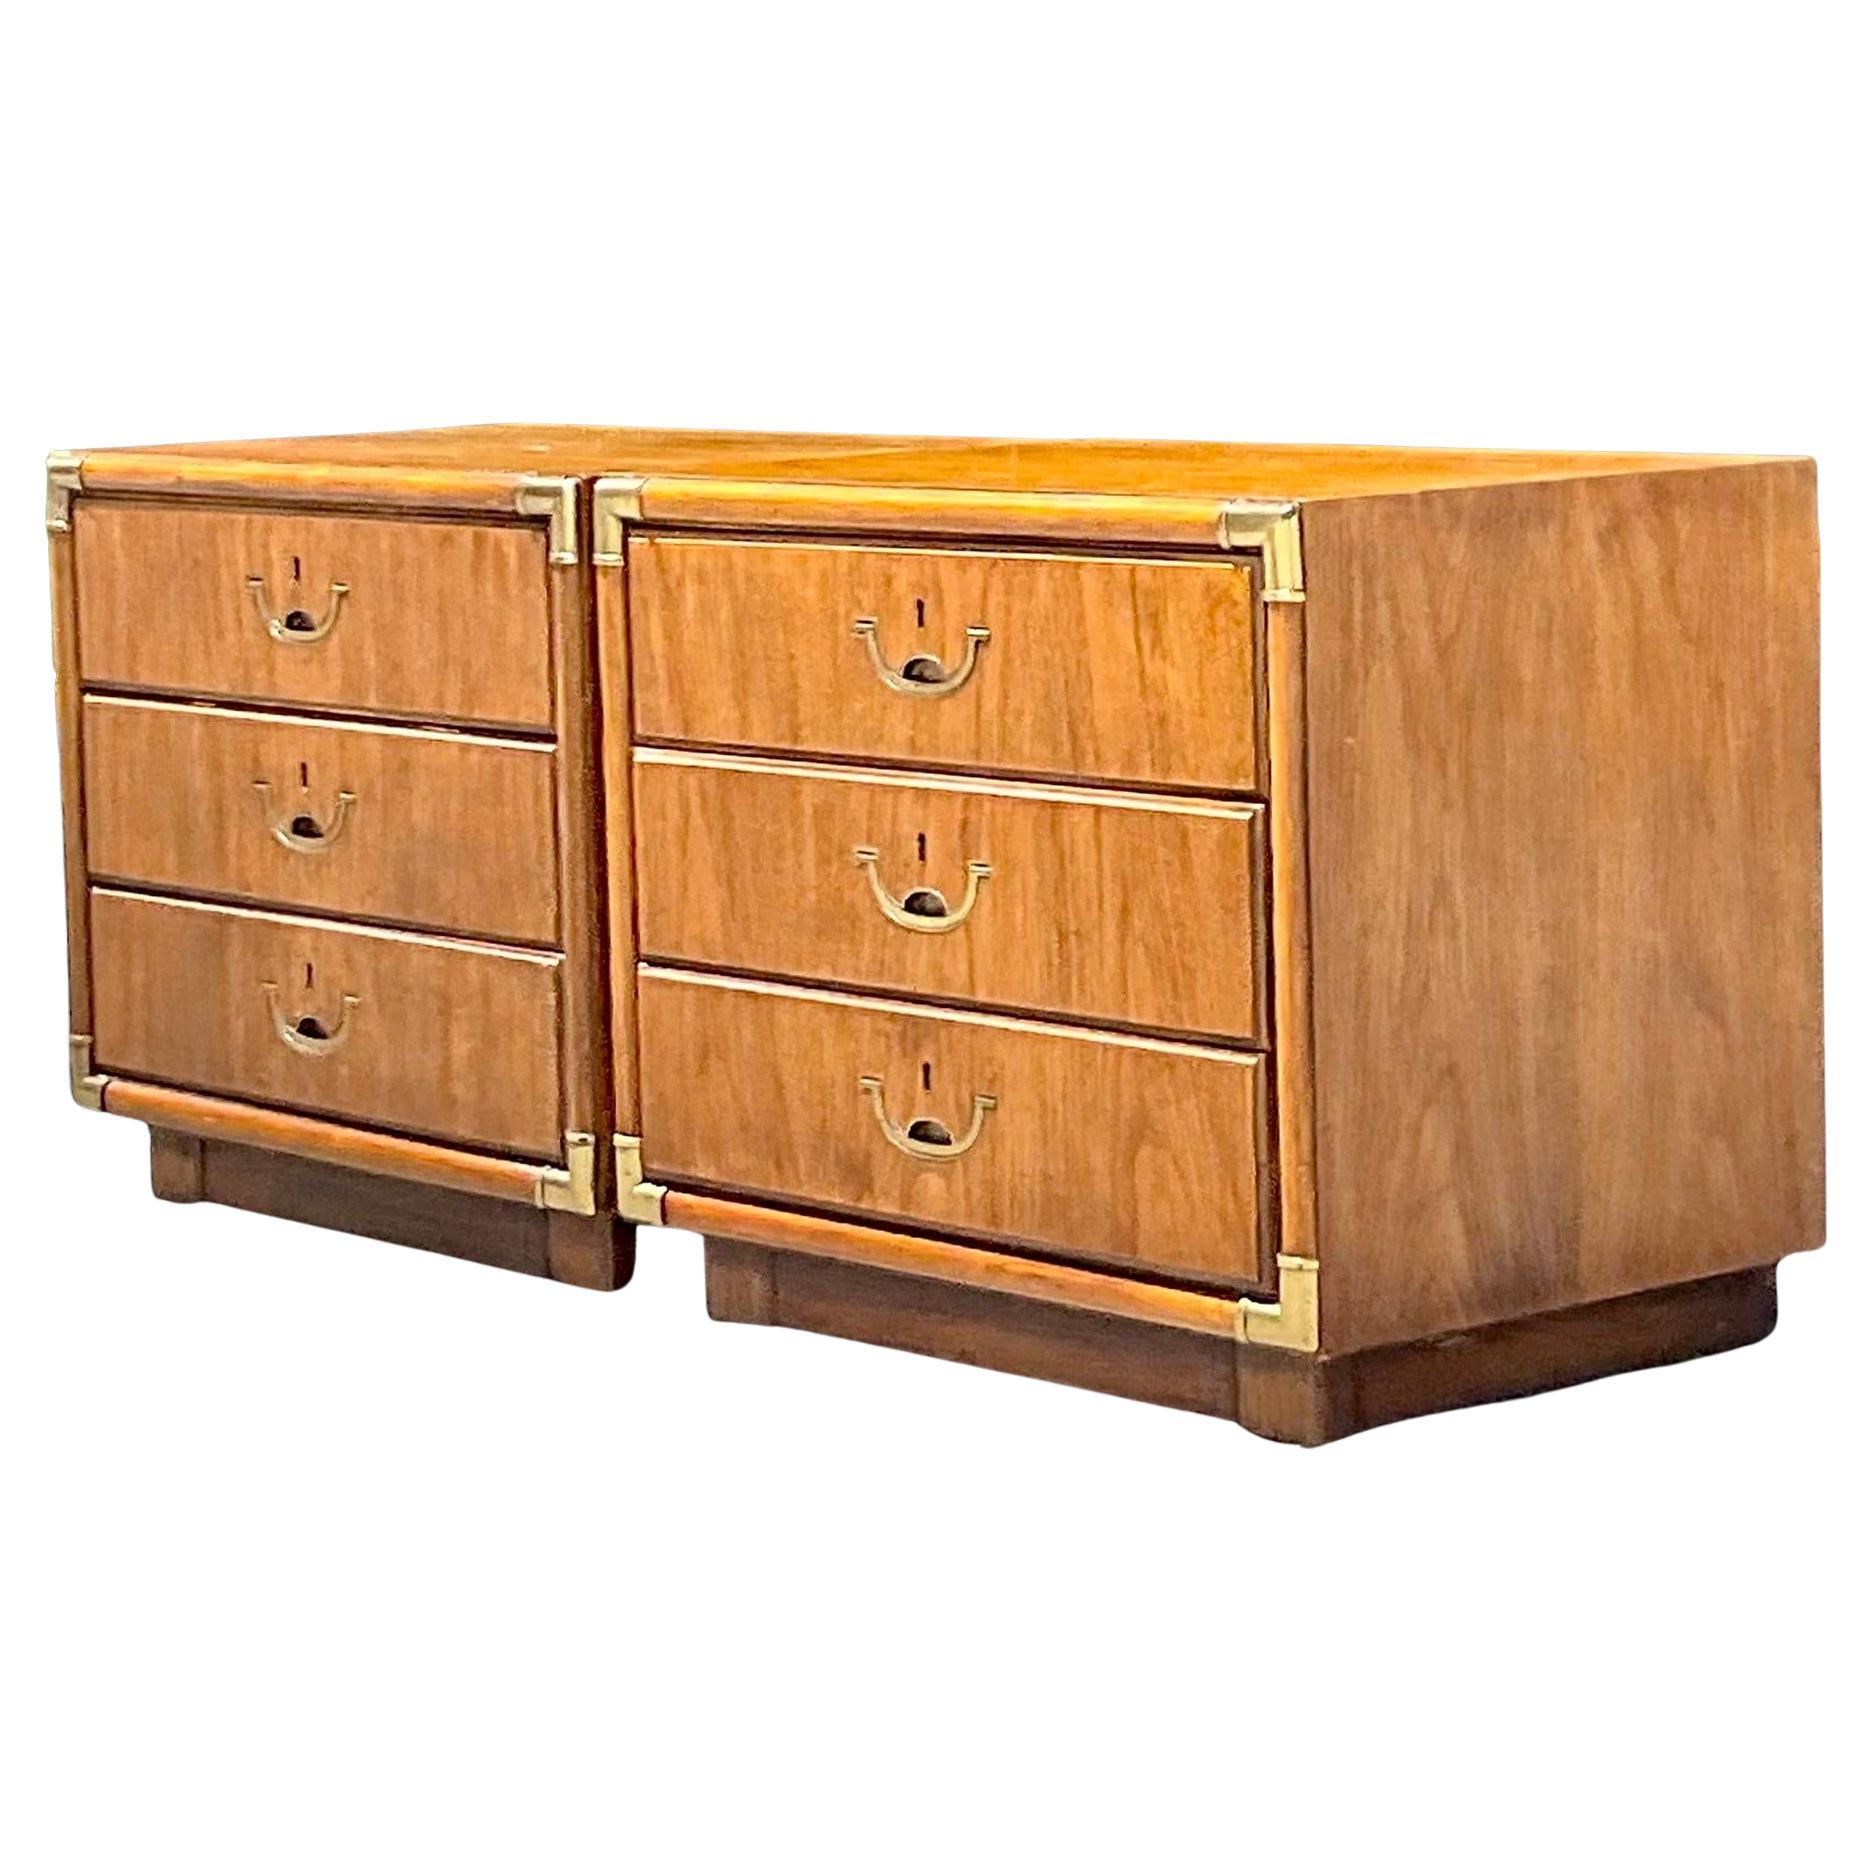 1980s Vintage Boho Drexel Campaign Nightstands - a Pair For Sale